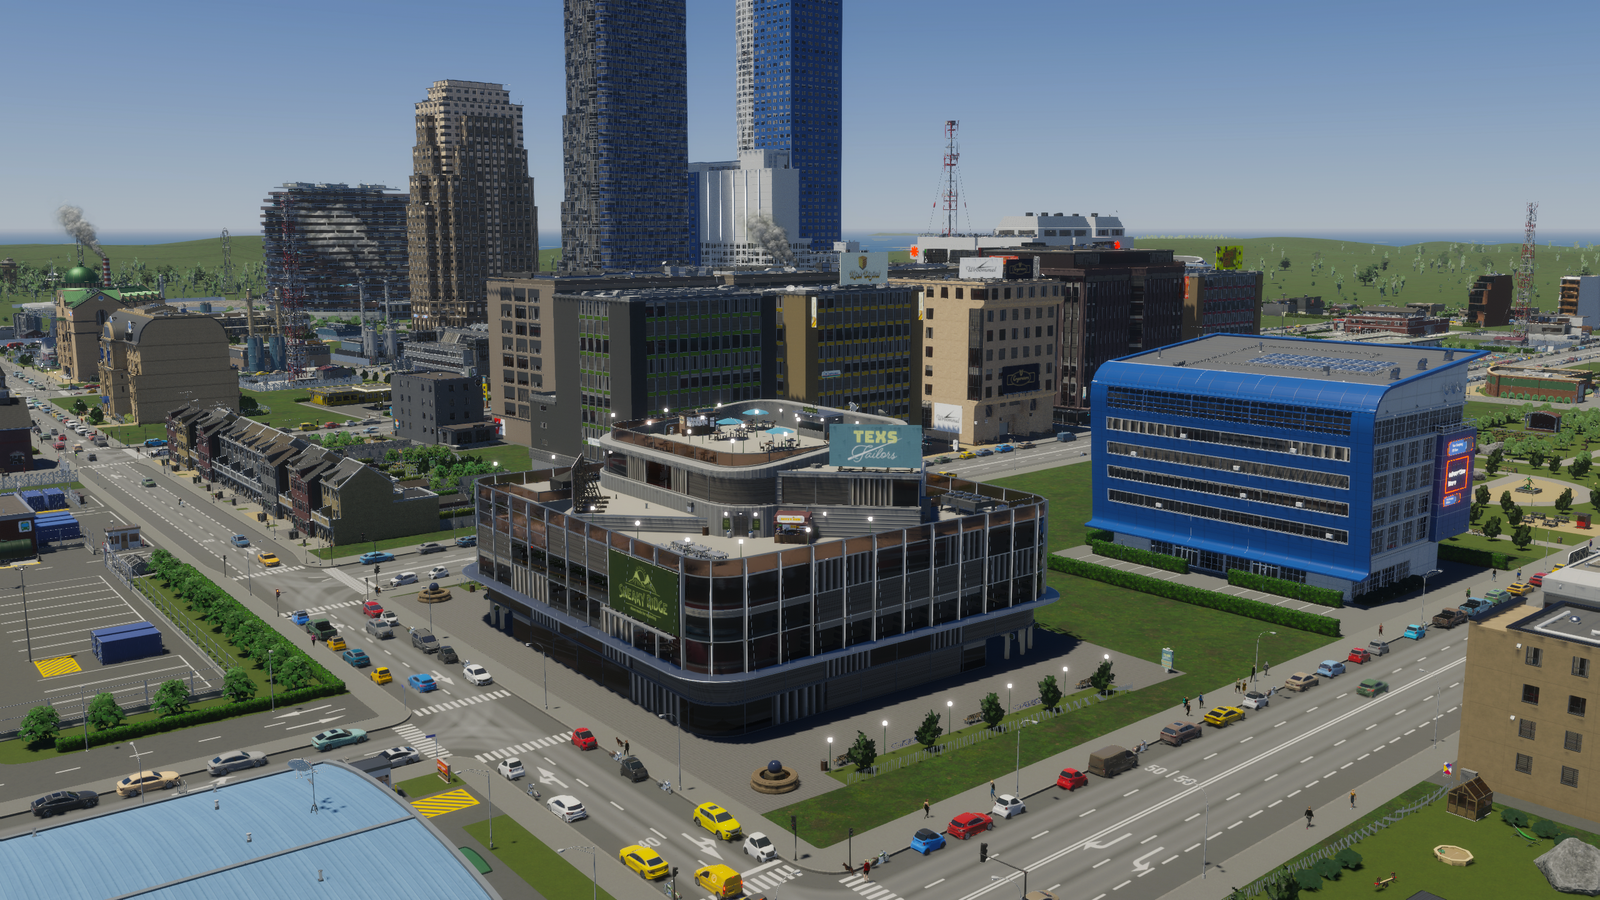 Cities: Skylines 2 dev says it won't release paid DLC until performance  fixed to our standards